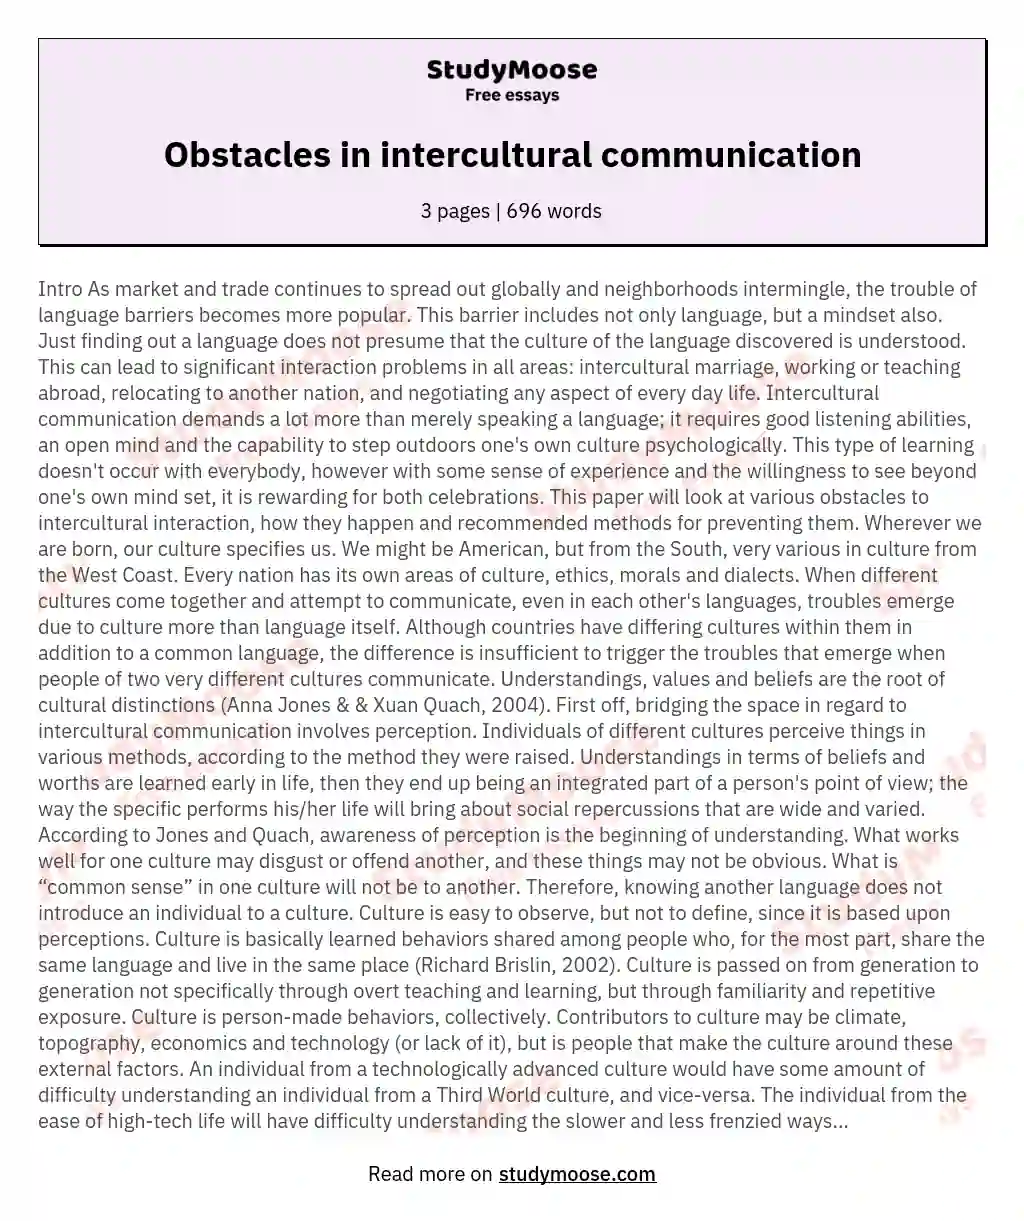 Obstacles in intercultural communication essay